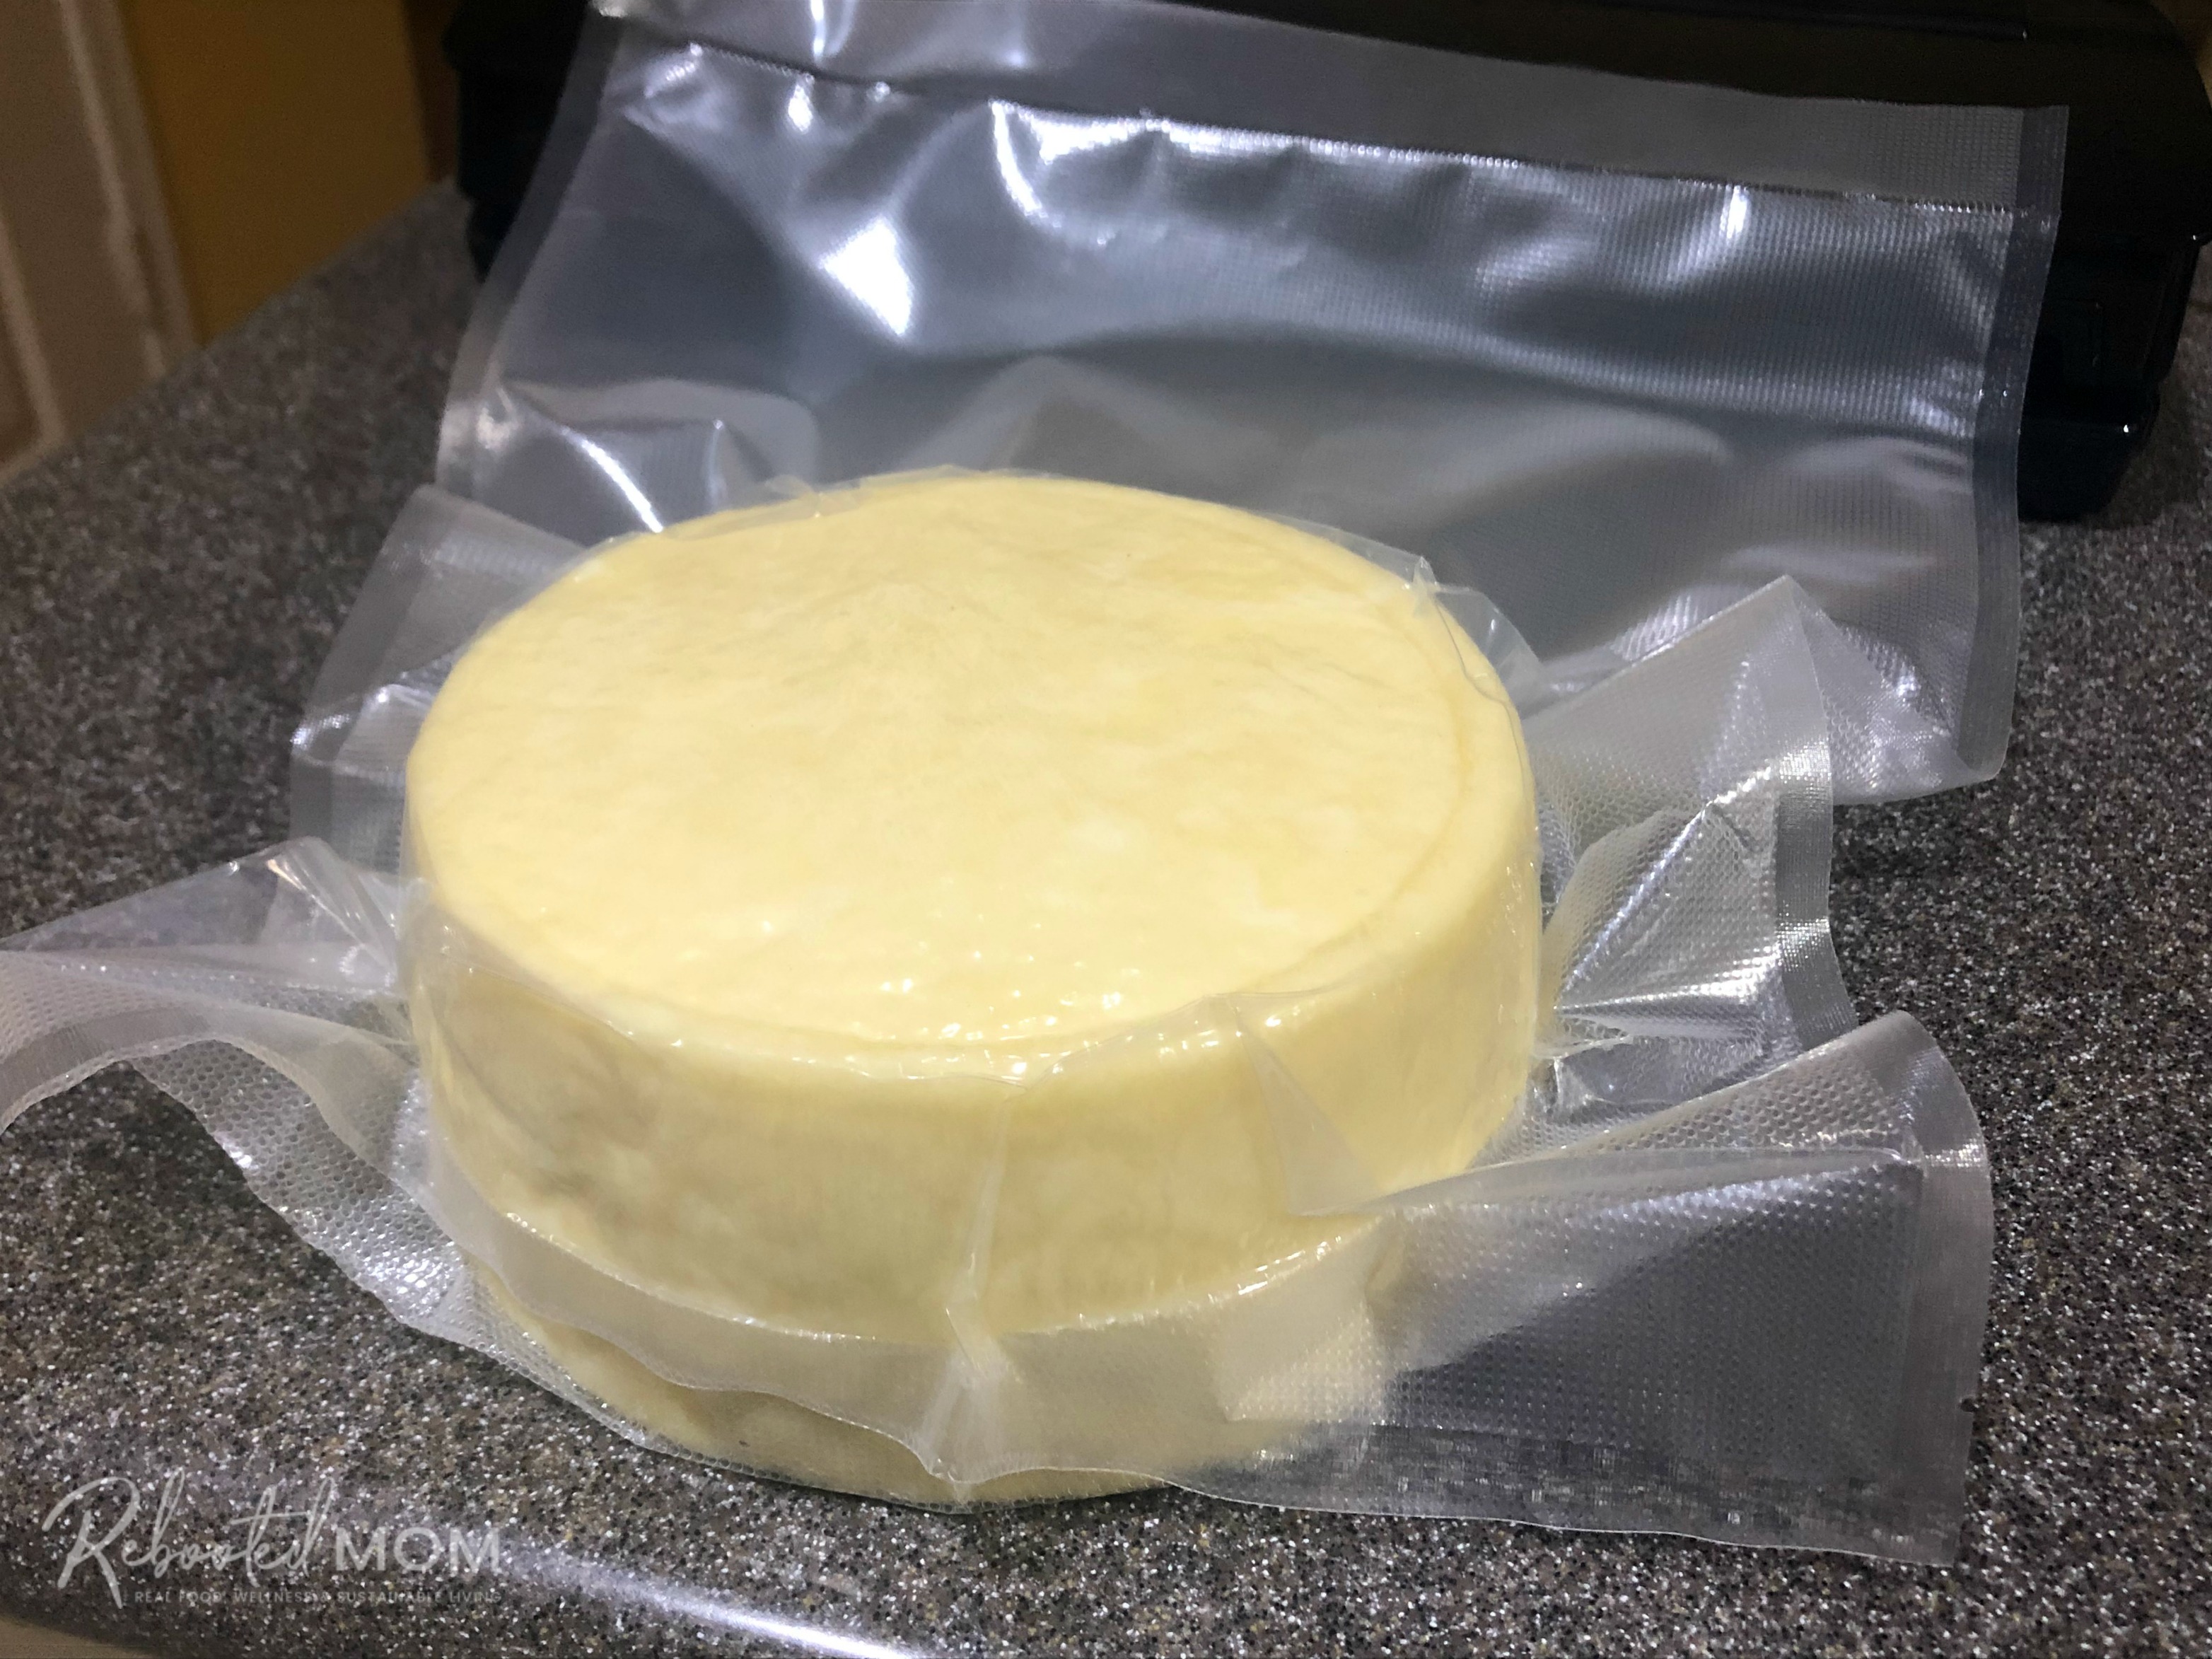 Monterey Jack Cheese - allow cheese to dry, then vac seal